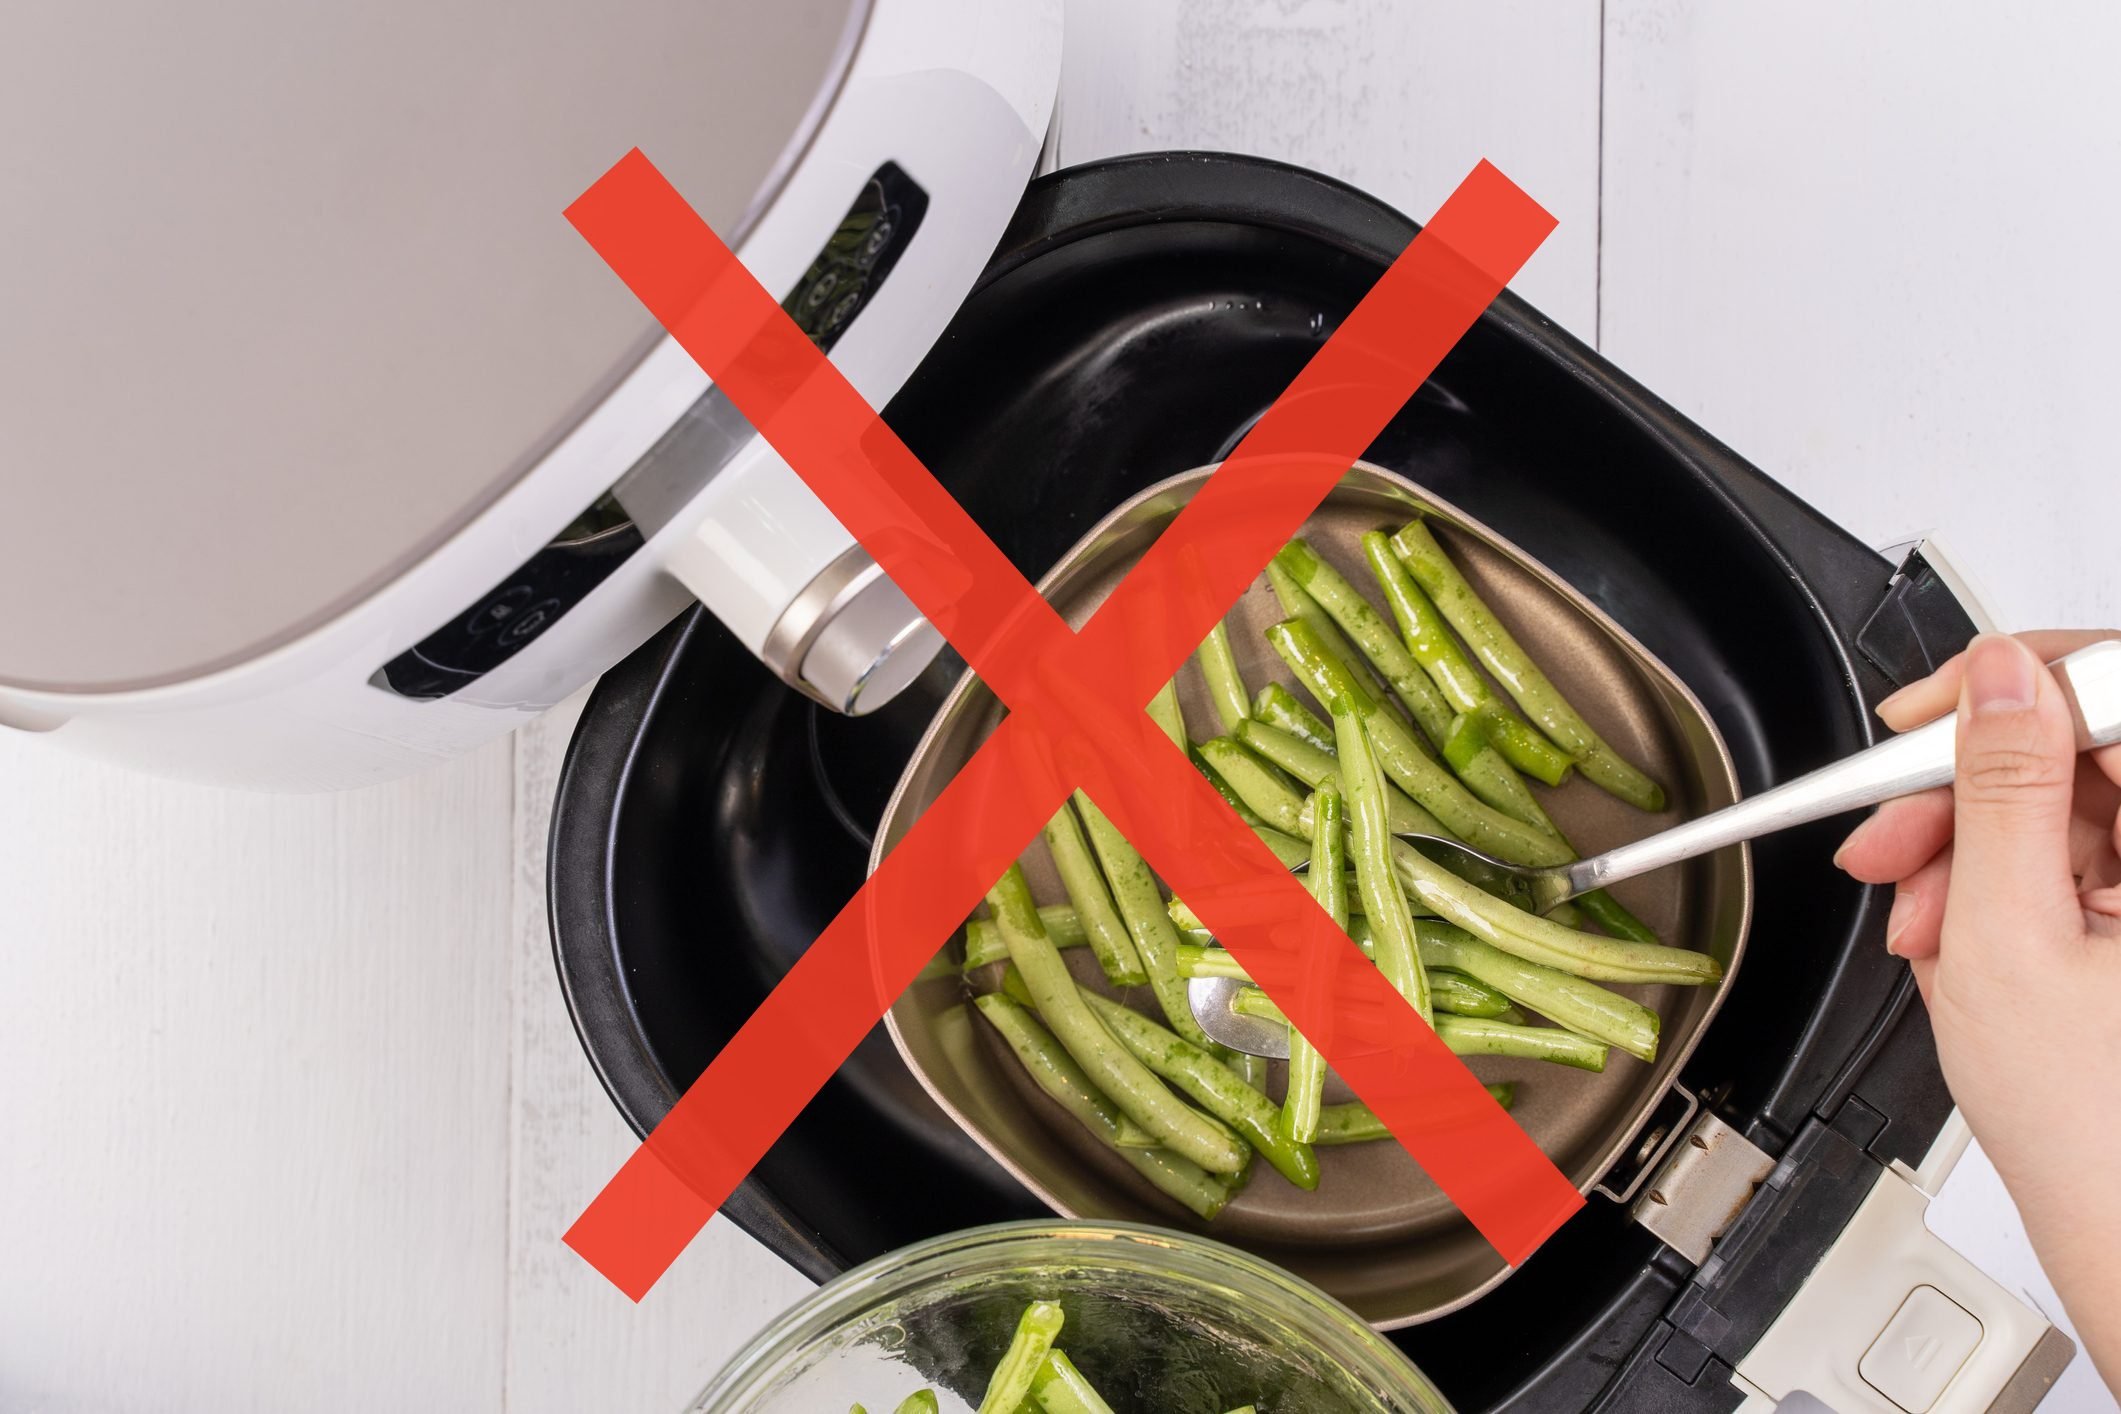 https://www.rd.com/wp-content/uploads/2021/01/Things-You-Probably-Shouldnt-Cook-in-an-Air-Fryer-GettyImages-1239713606-INSJOY.jpg